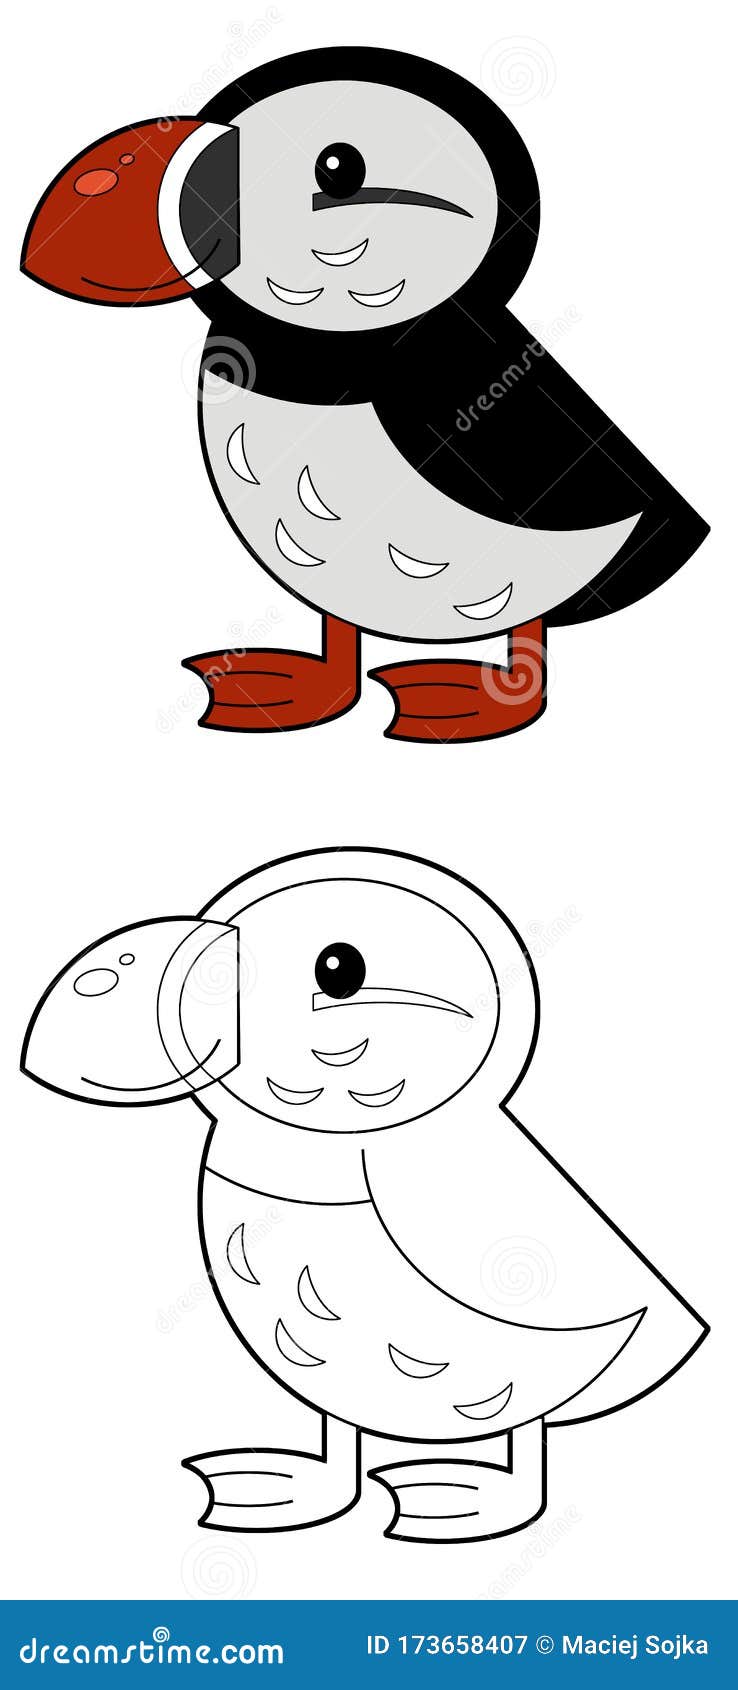 How To Draw A Puffin  Art For Kids Hub 